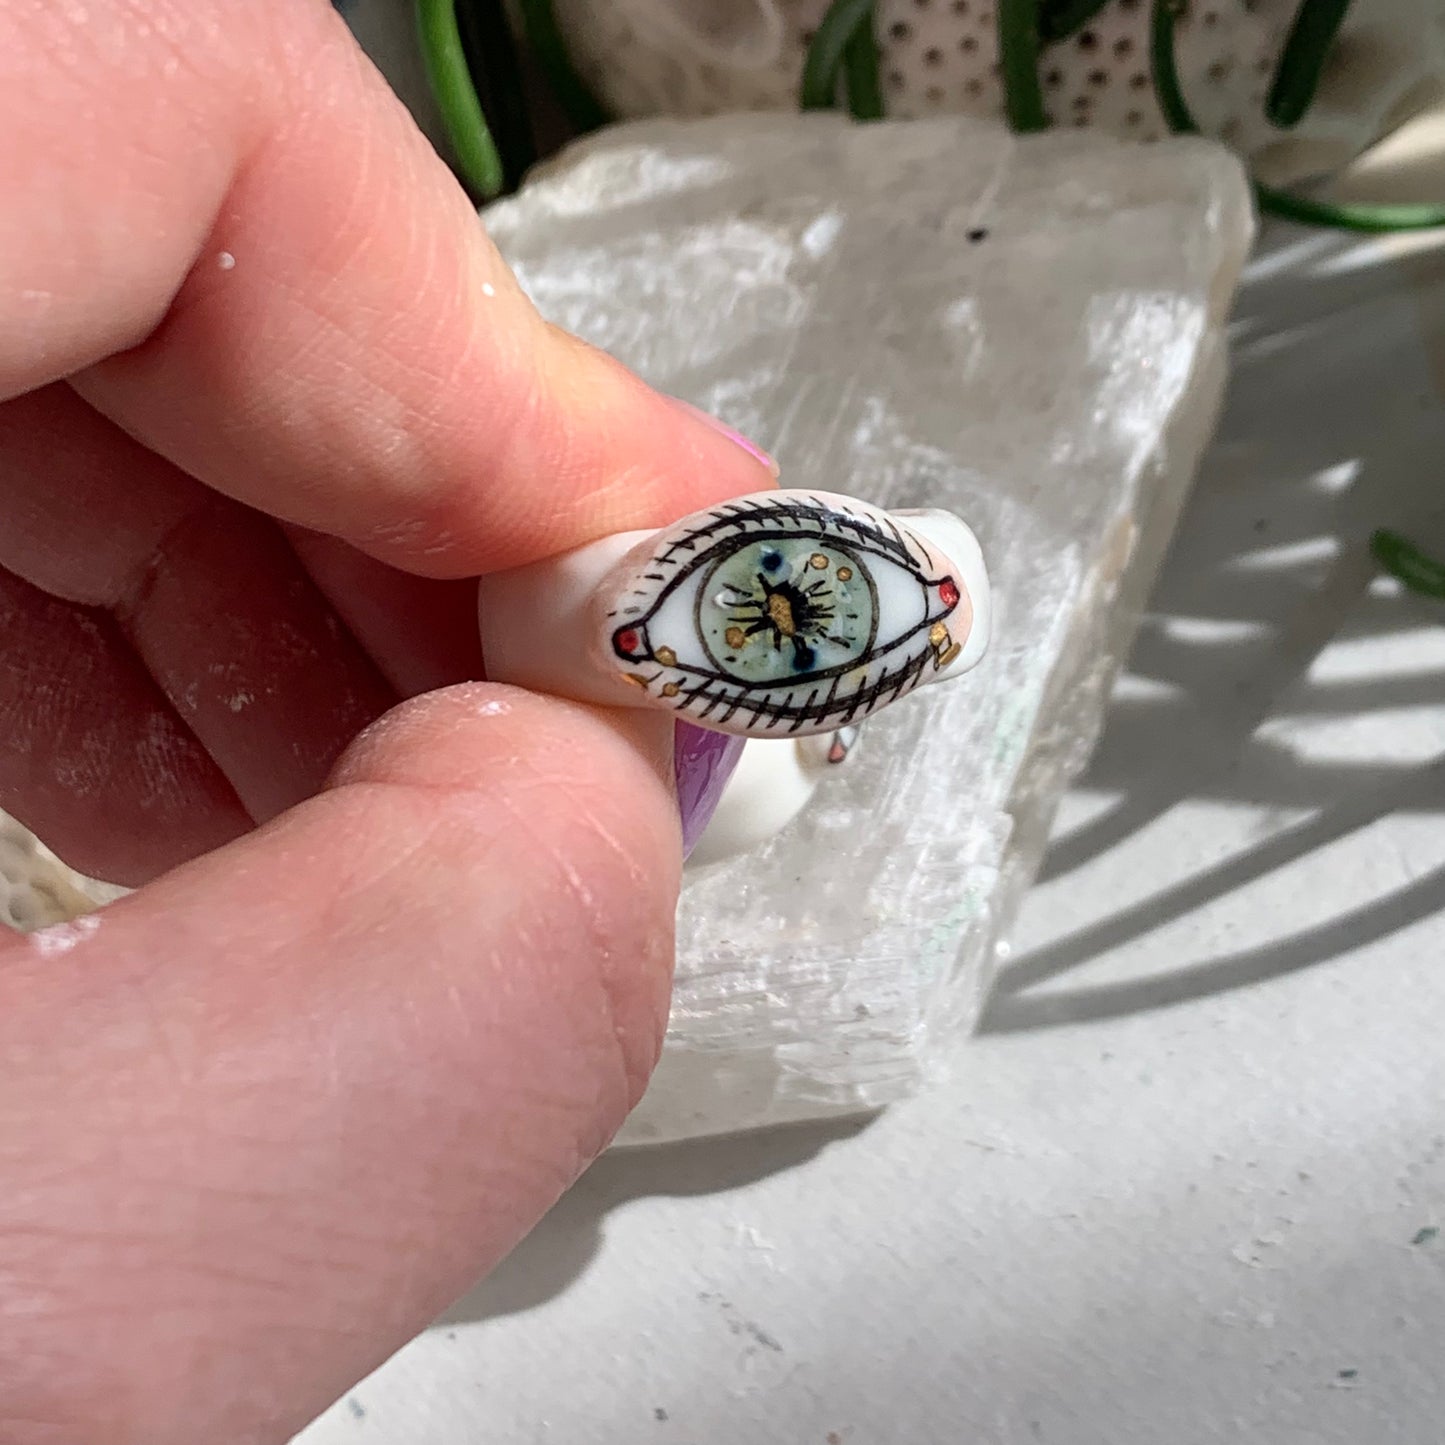 Hand painted porcelain ‘the protective eye’ ring, choose a size